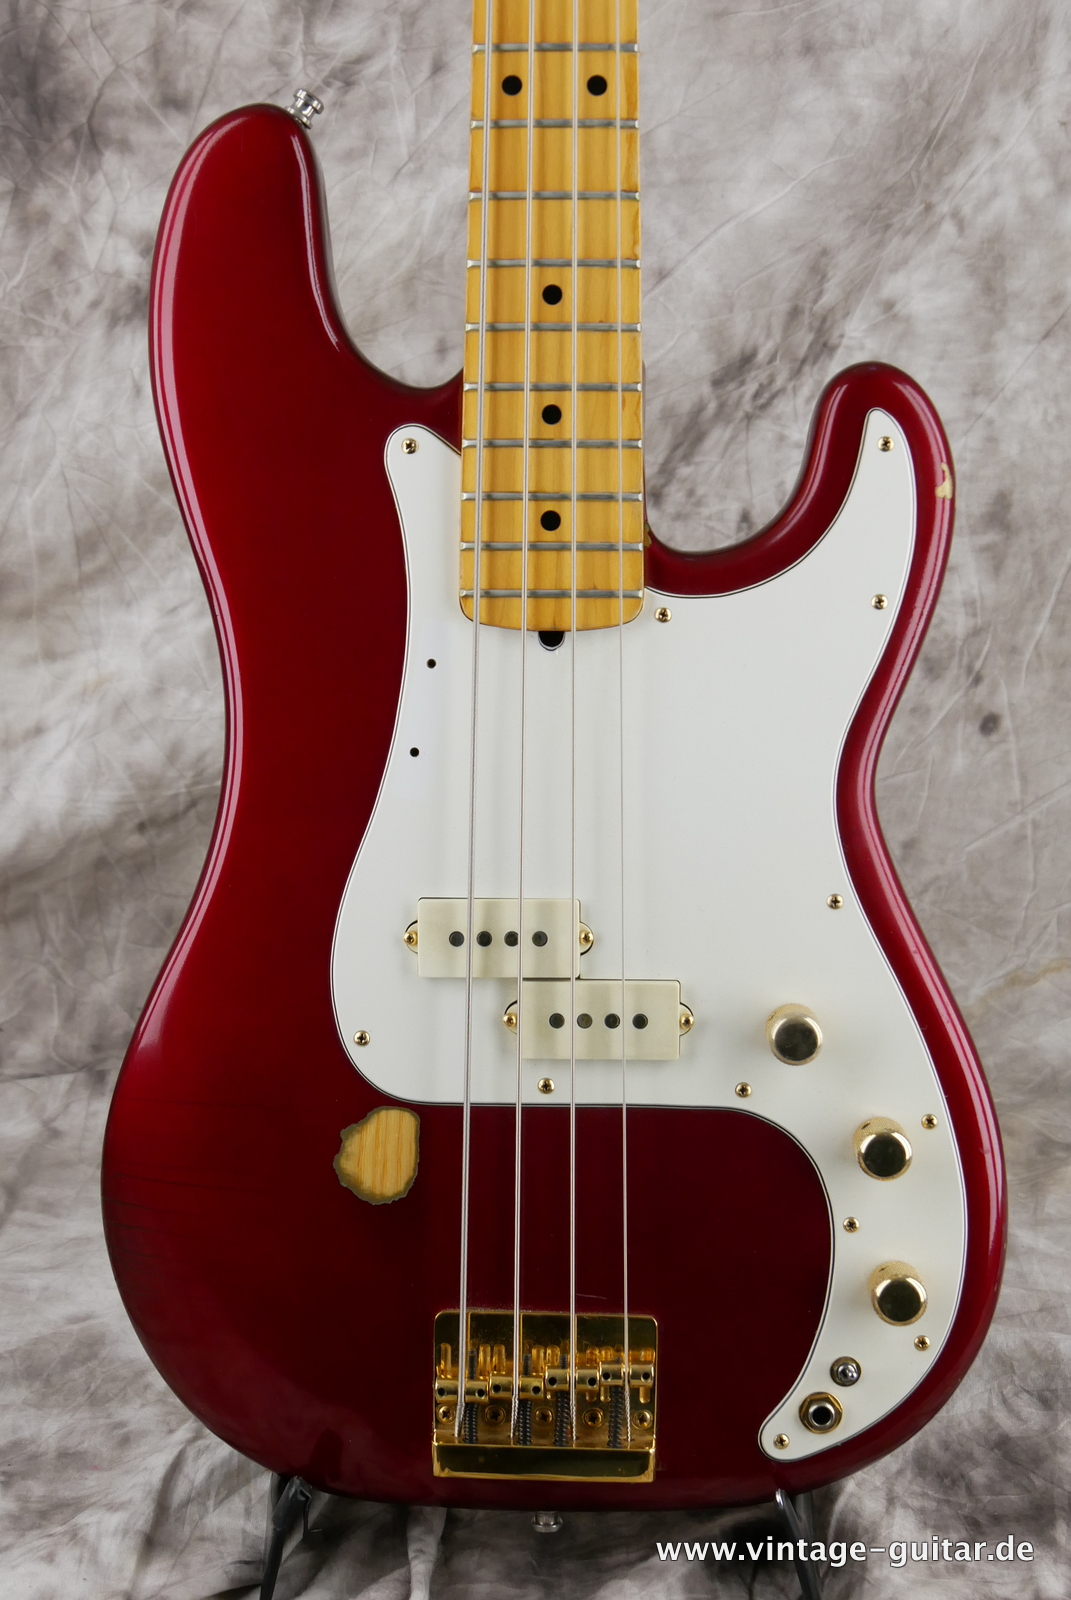 Fender_Precision_Special_USA_candy_apple_red_1982-003.JPG